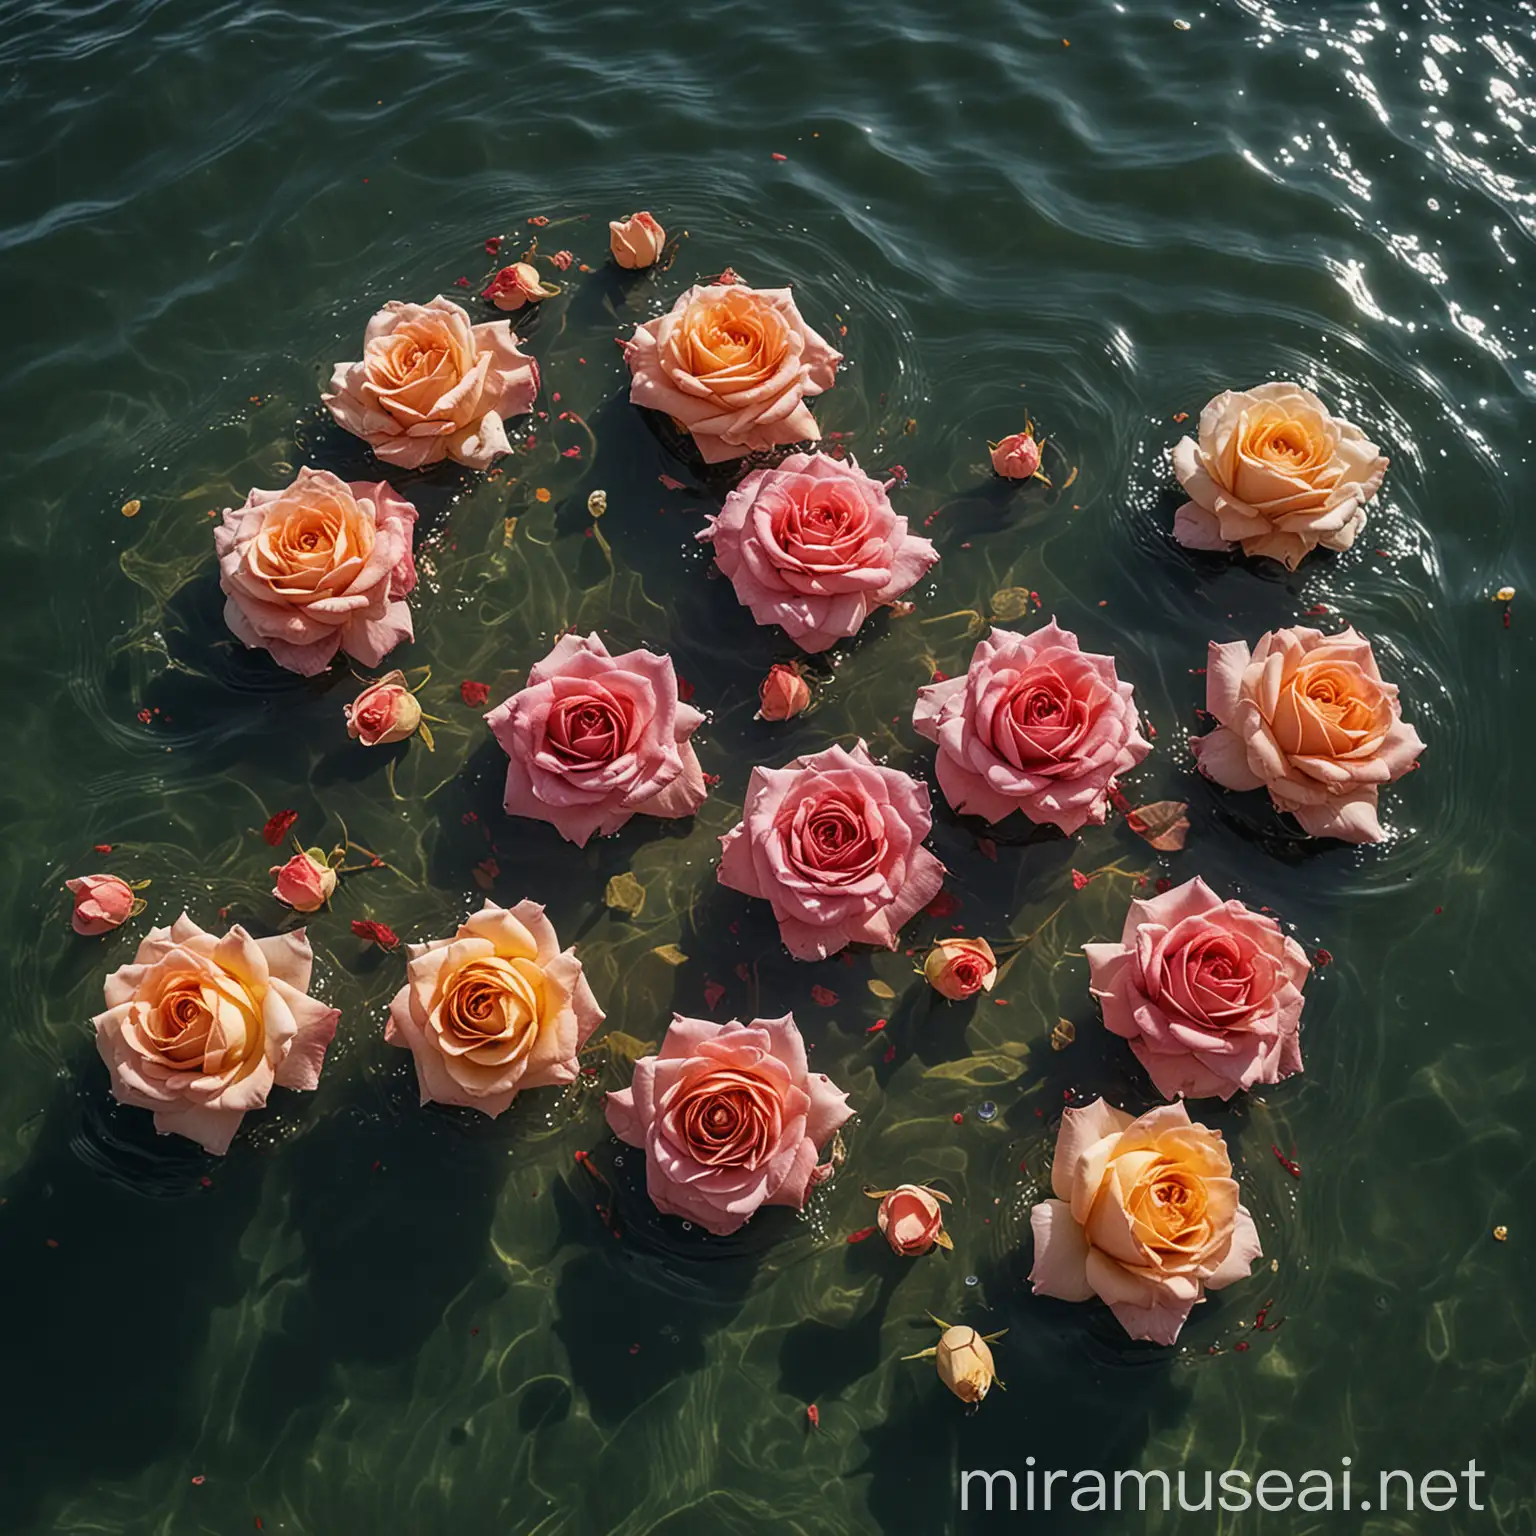 bloomed roses in different colors floating  in the sea